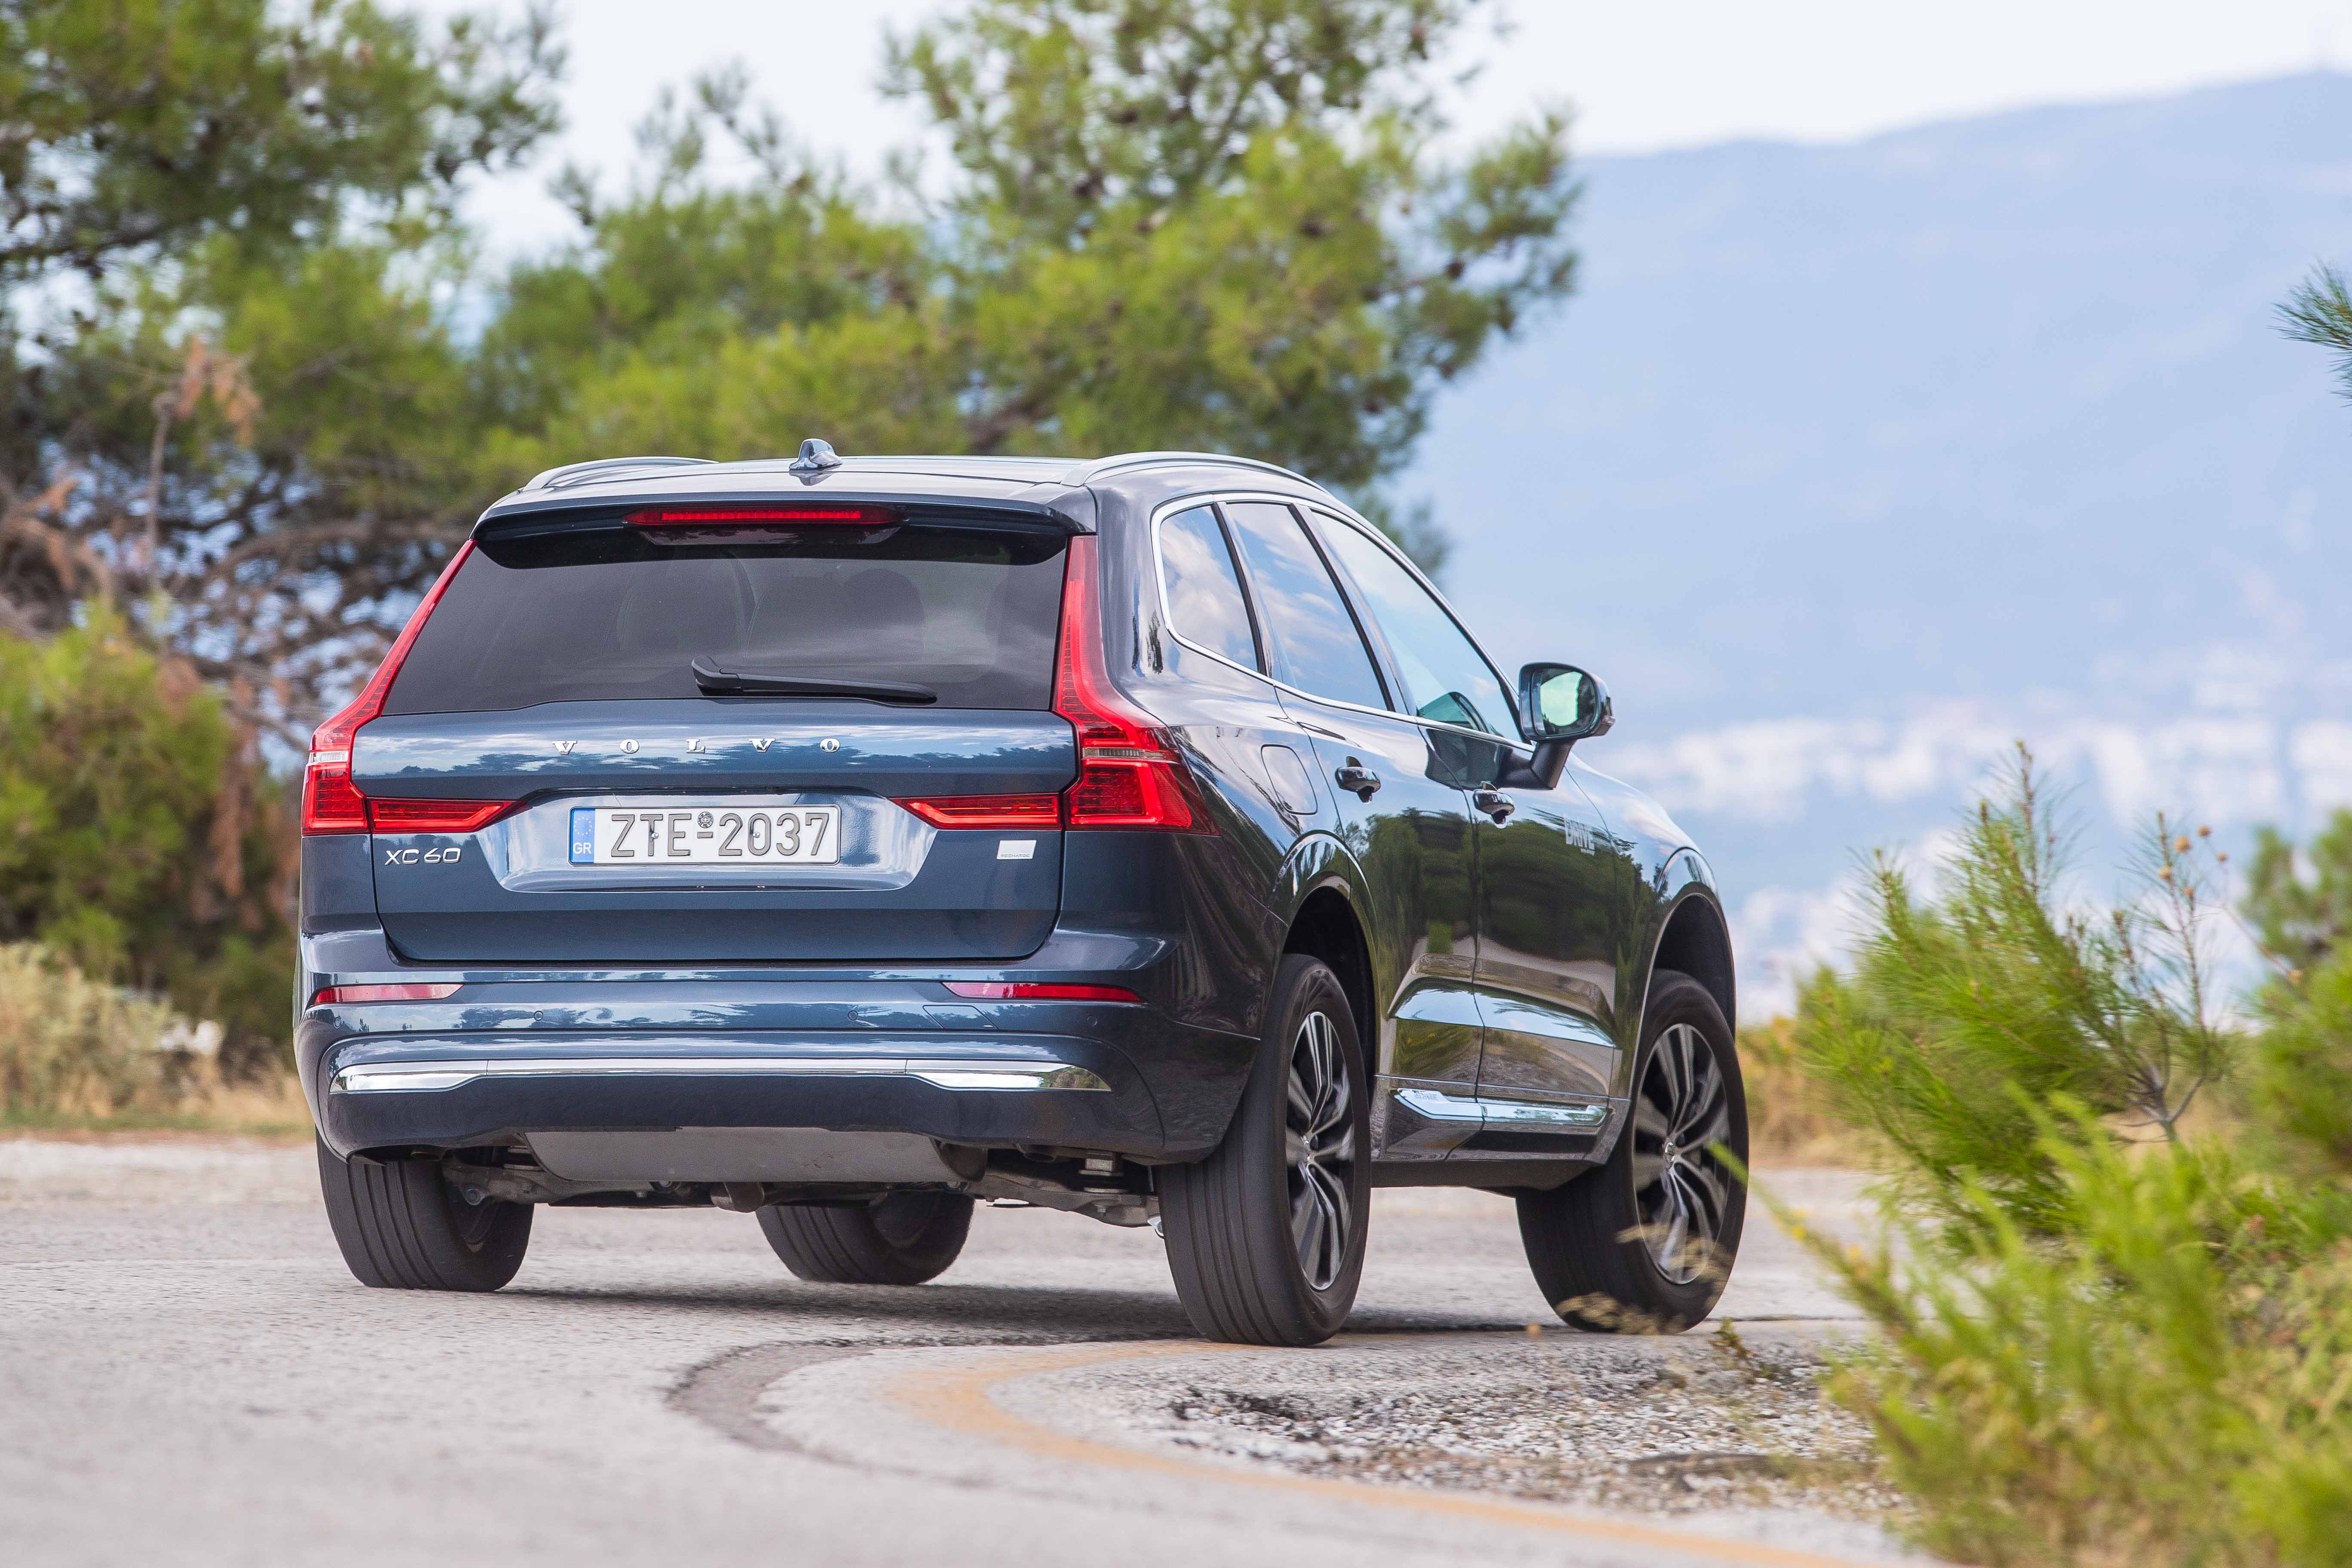 Test drive: Volvo XC60 T8 Recharge, Photo credit DRIVE Media Group/ Thanasis Koutsogiannis